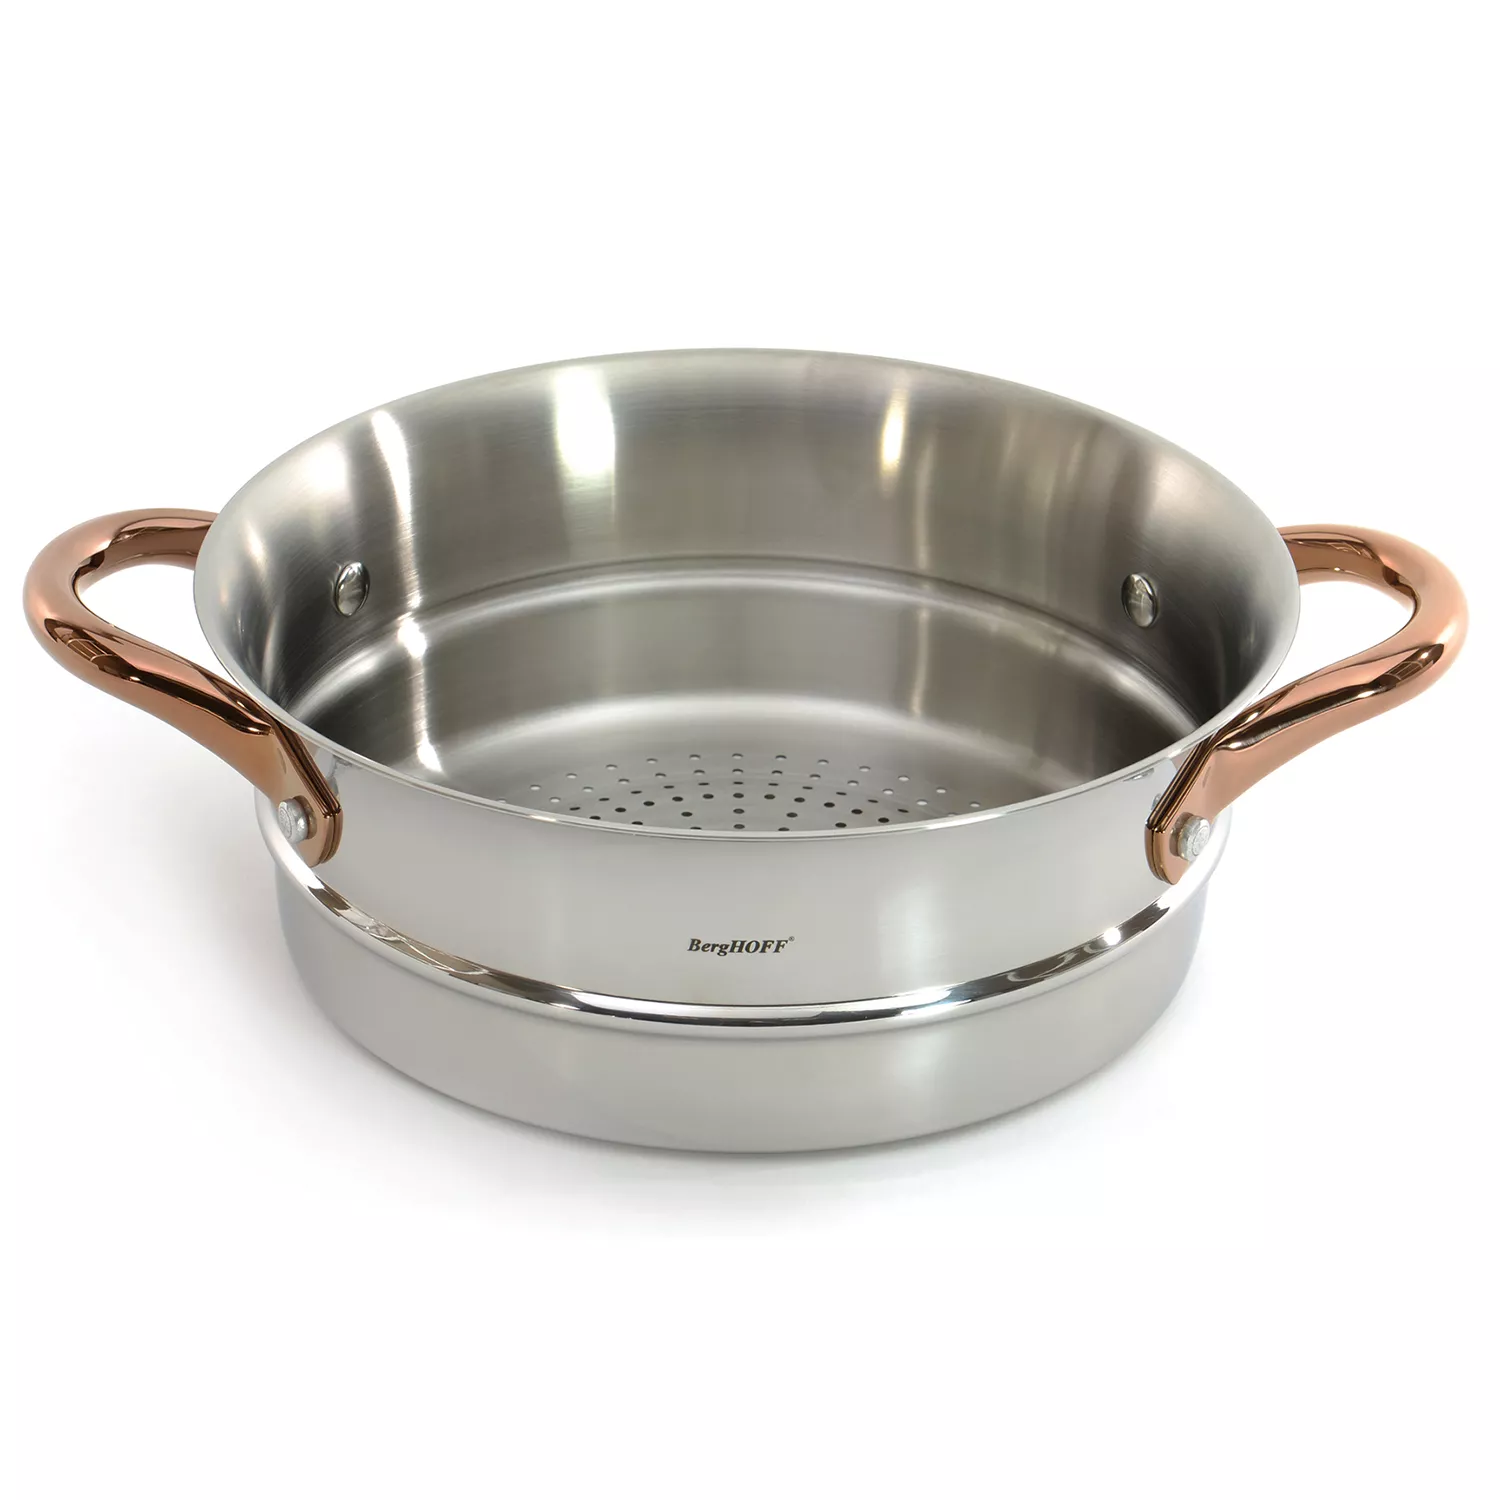 BergHOFF Ouro Stainless Steel Steamer with 2 Side Handles, Silver